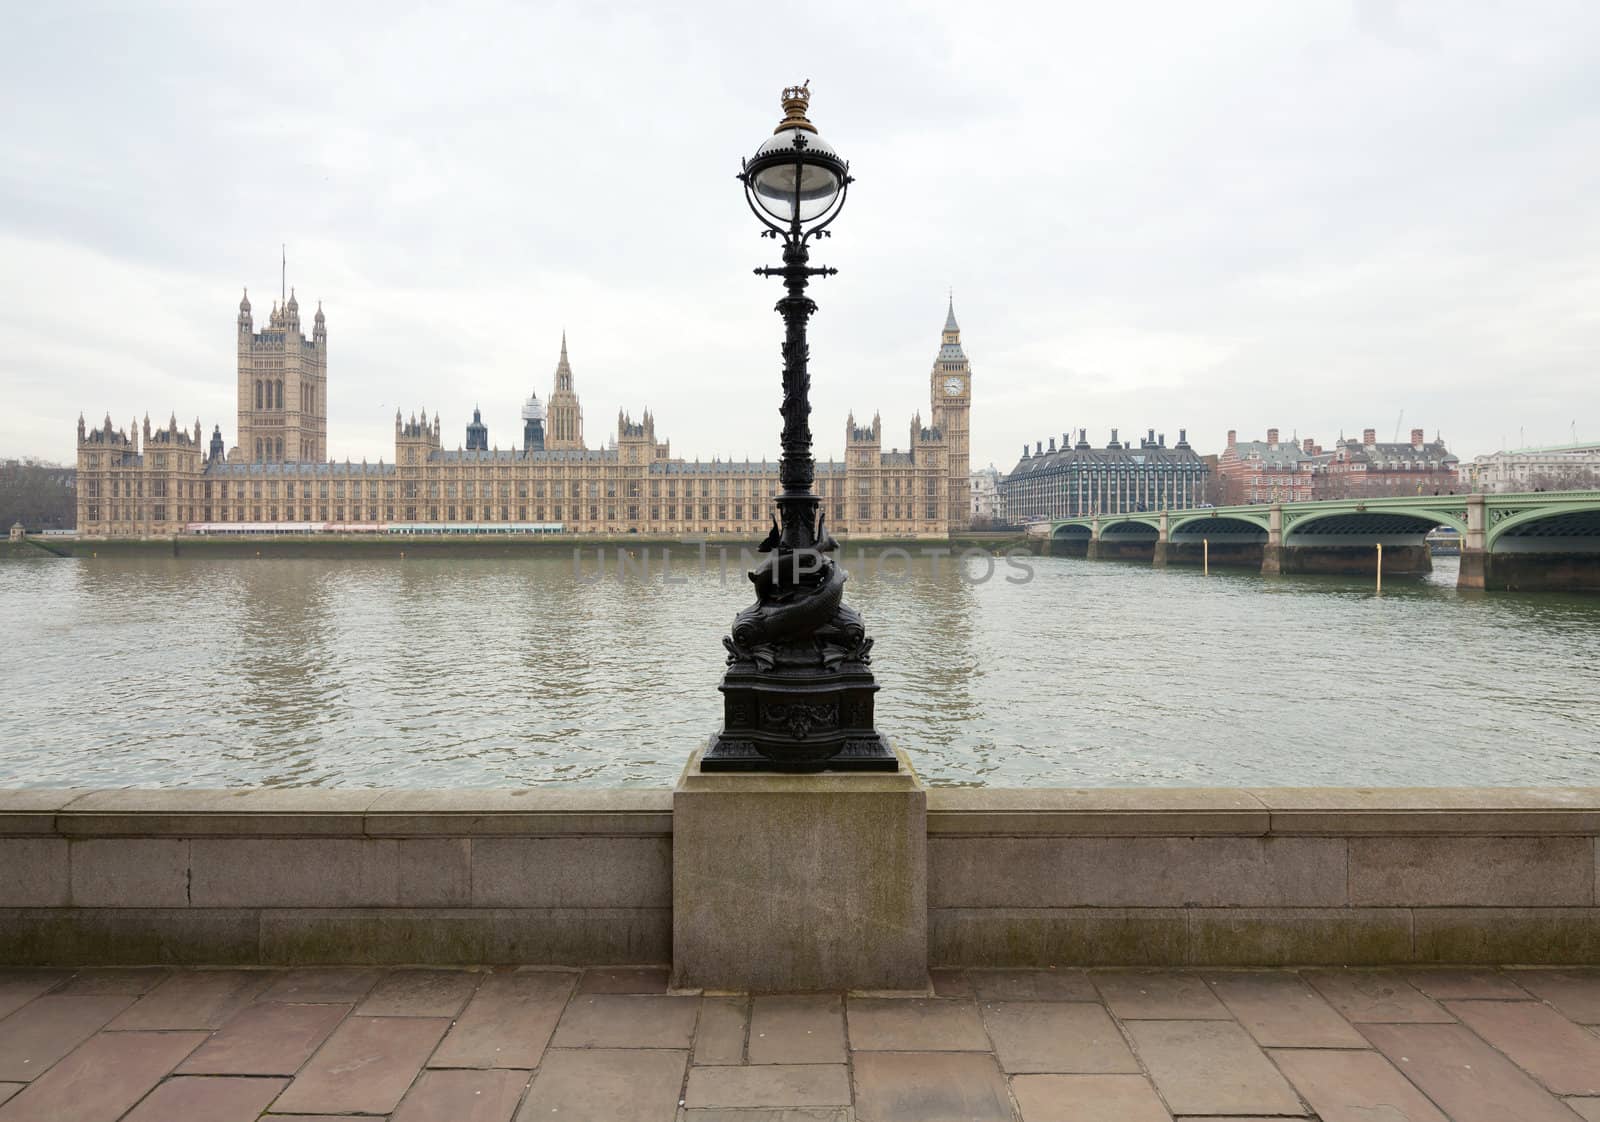 View of the Palace of Westminster from the Thames by Antartis